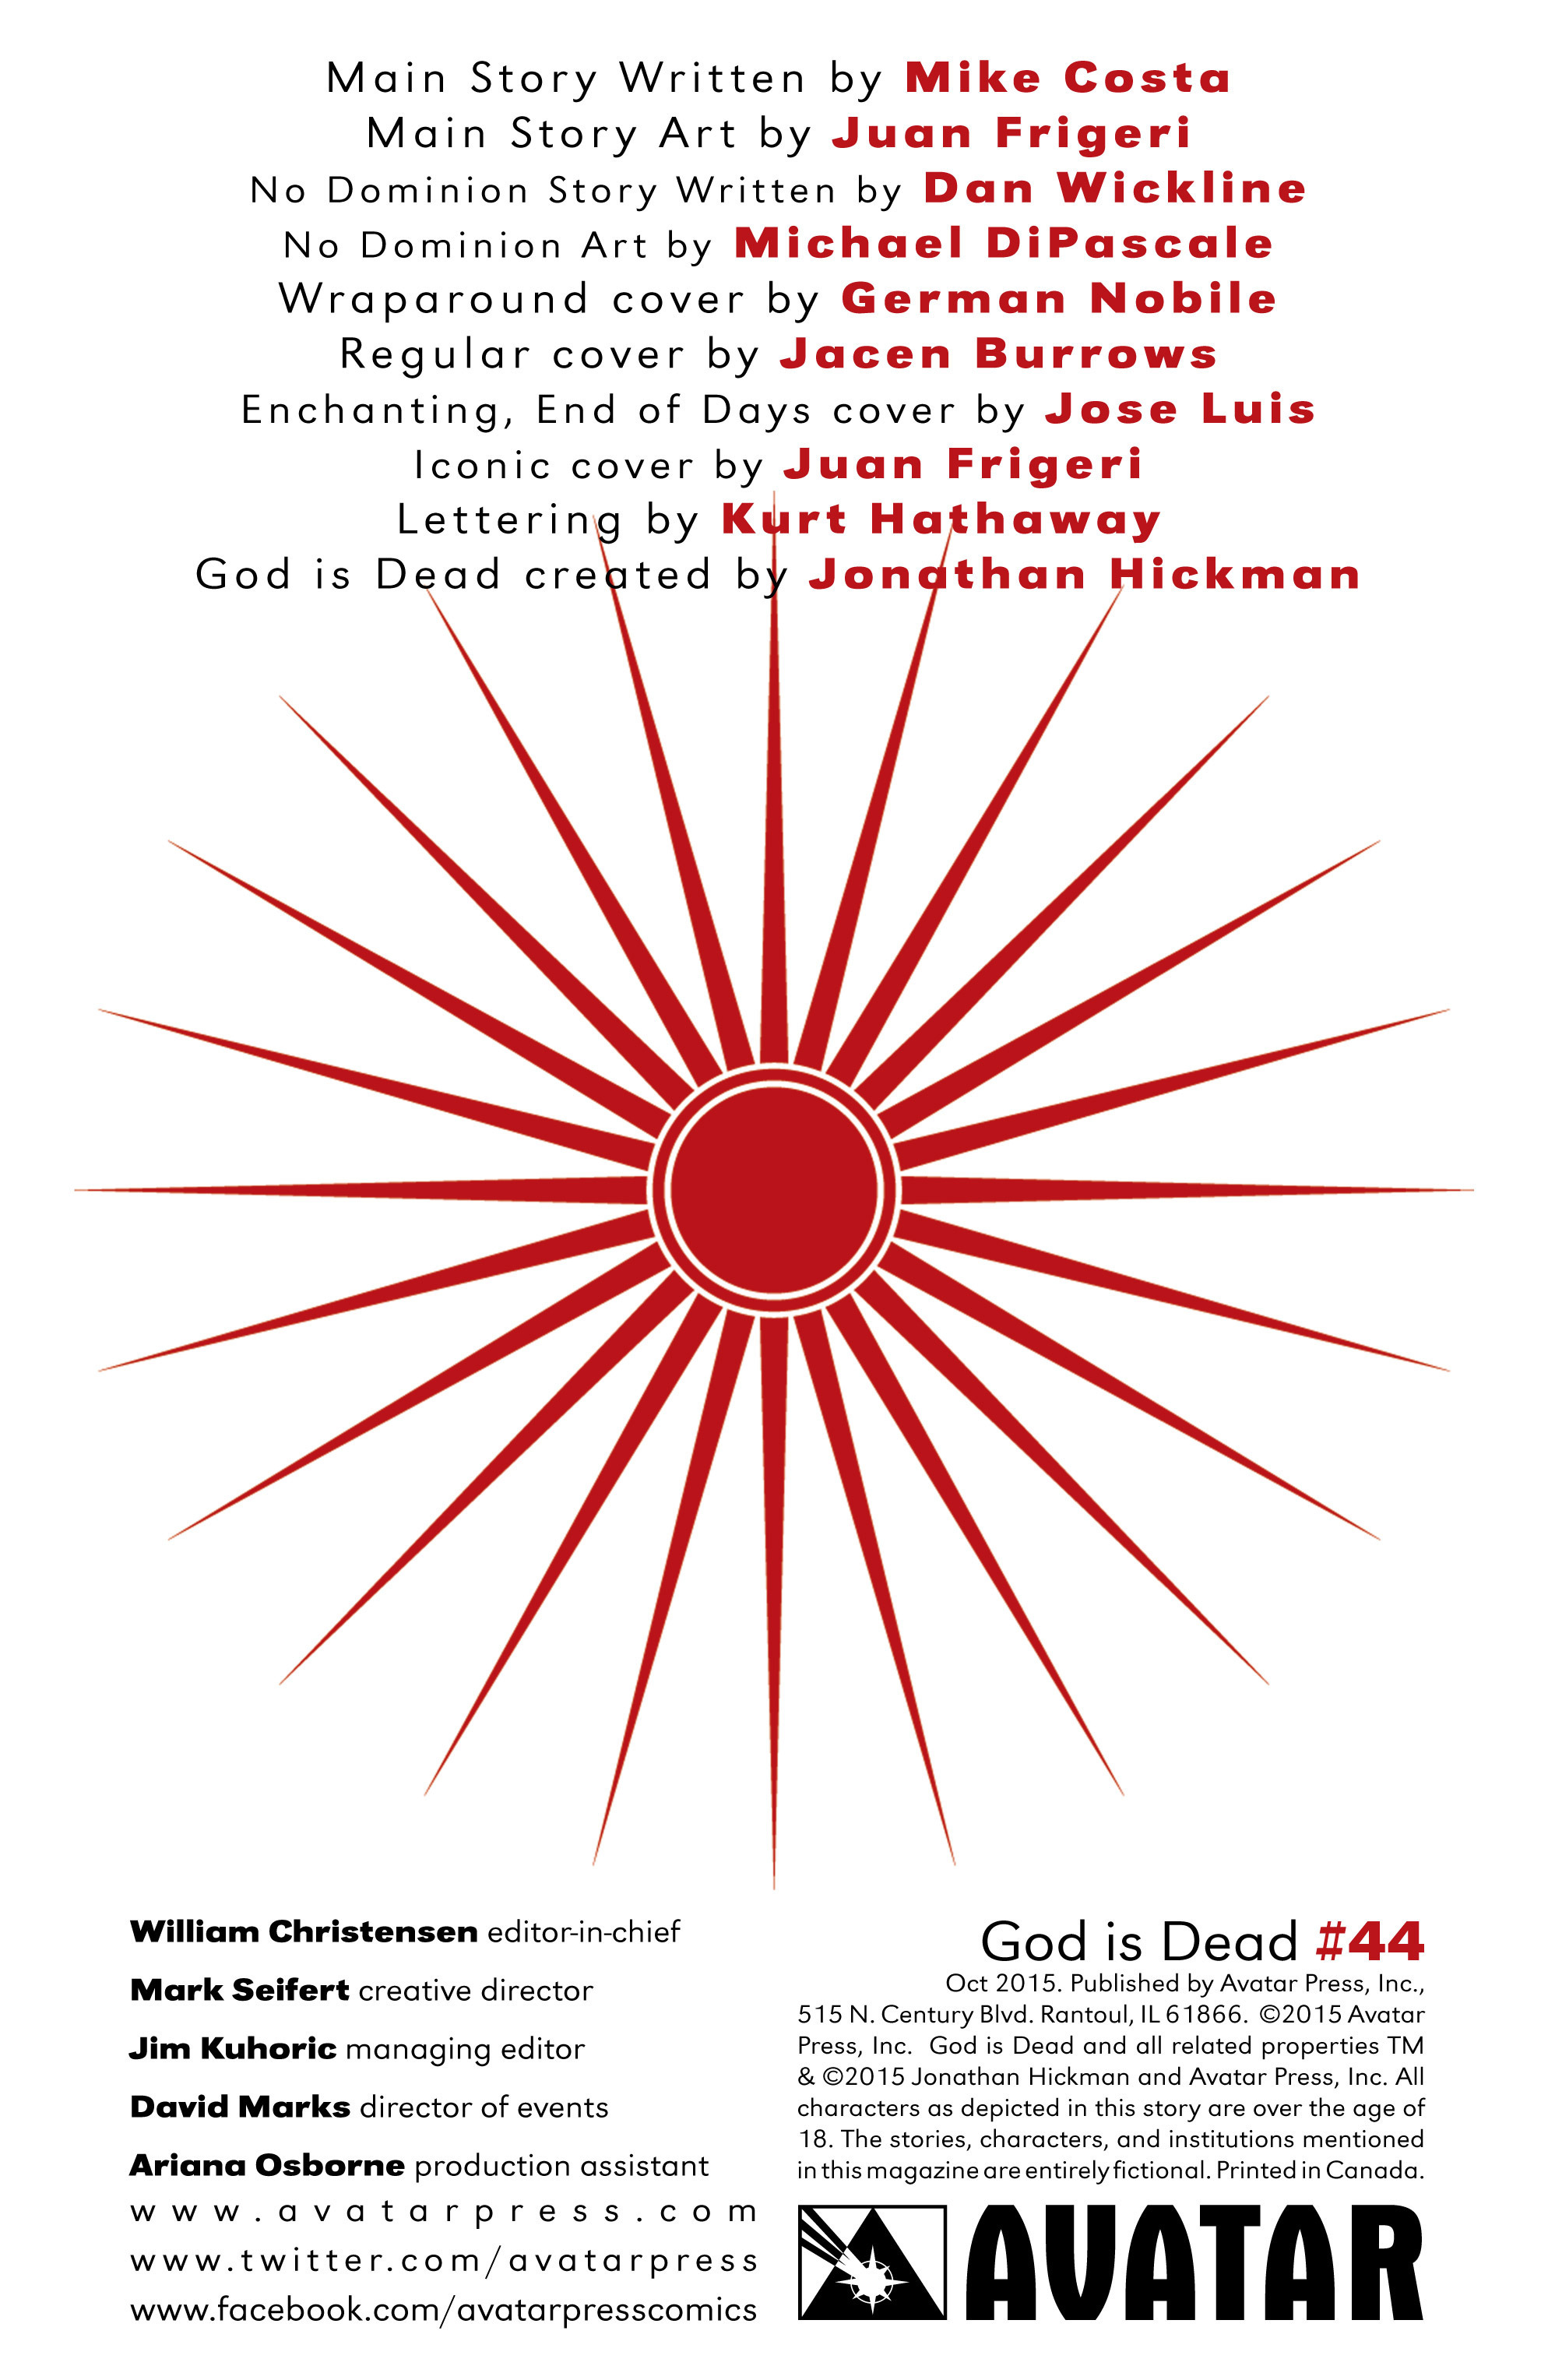 Read online God Is Dead comic -  Issue #44 - 2